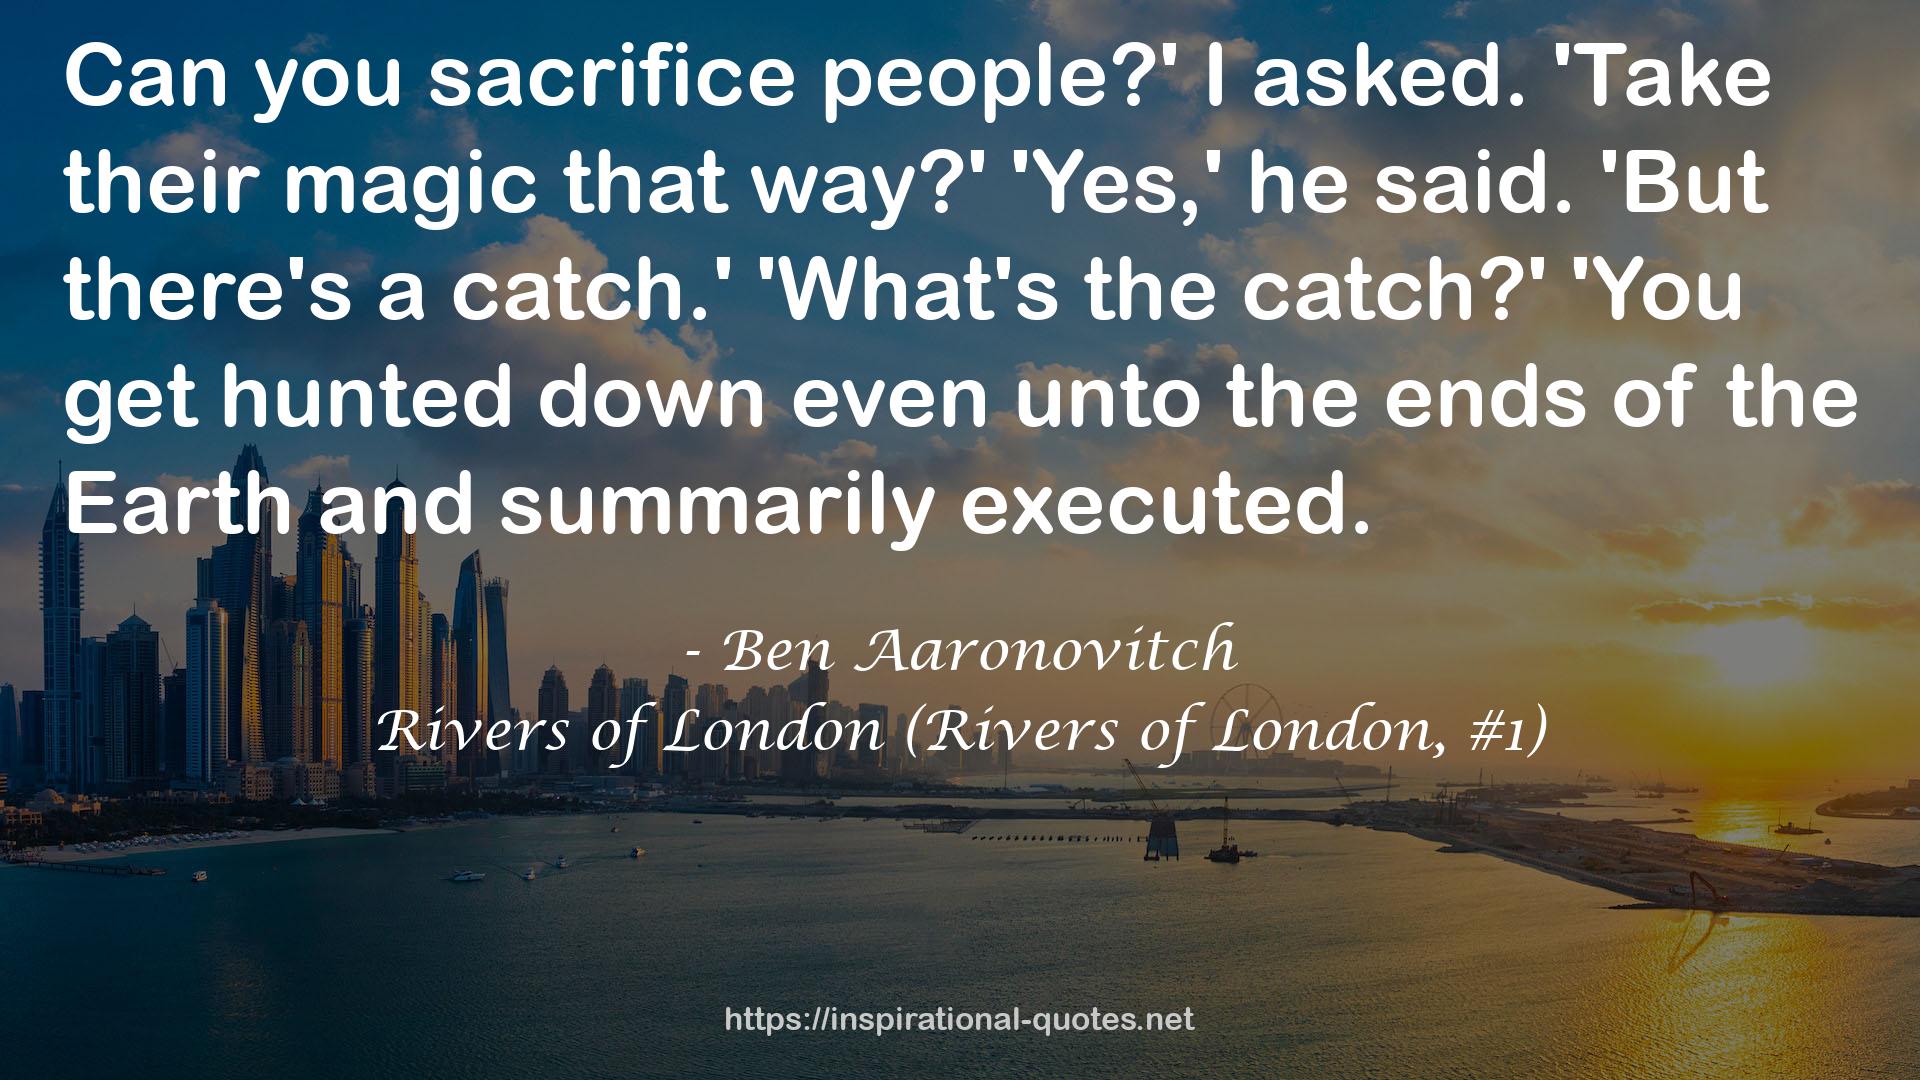 Rivers of London (Rivers of London, #1) QUOTES